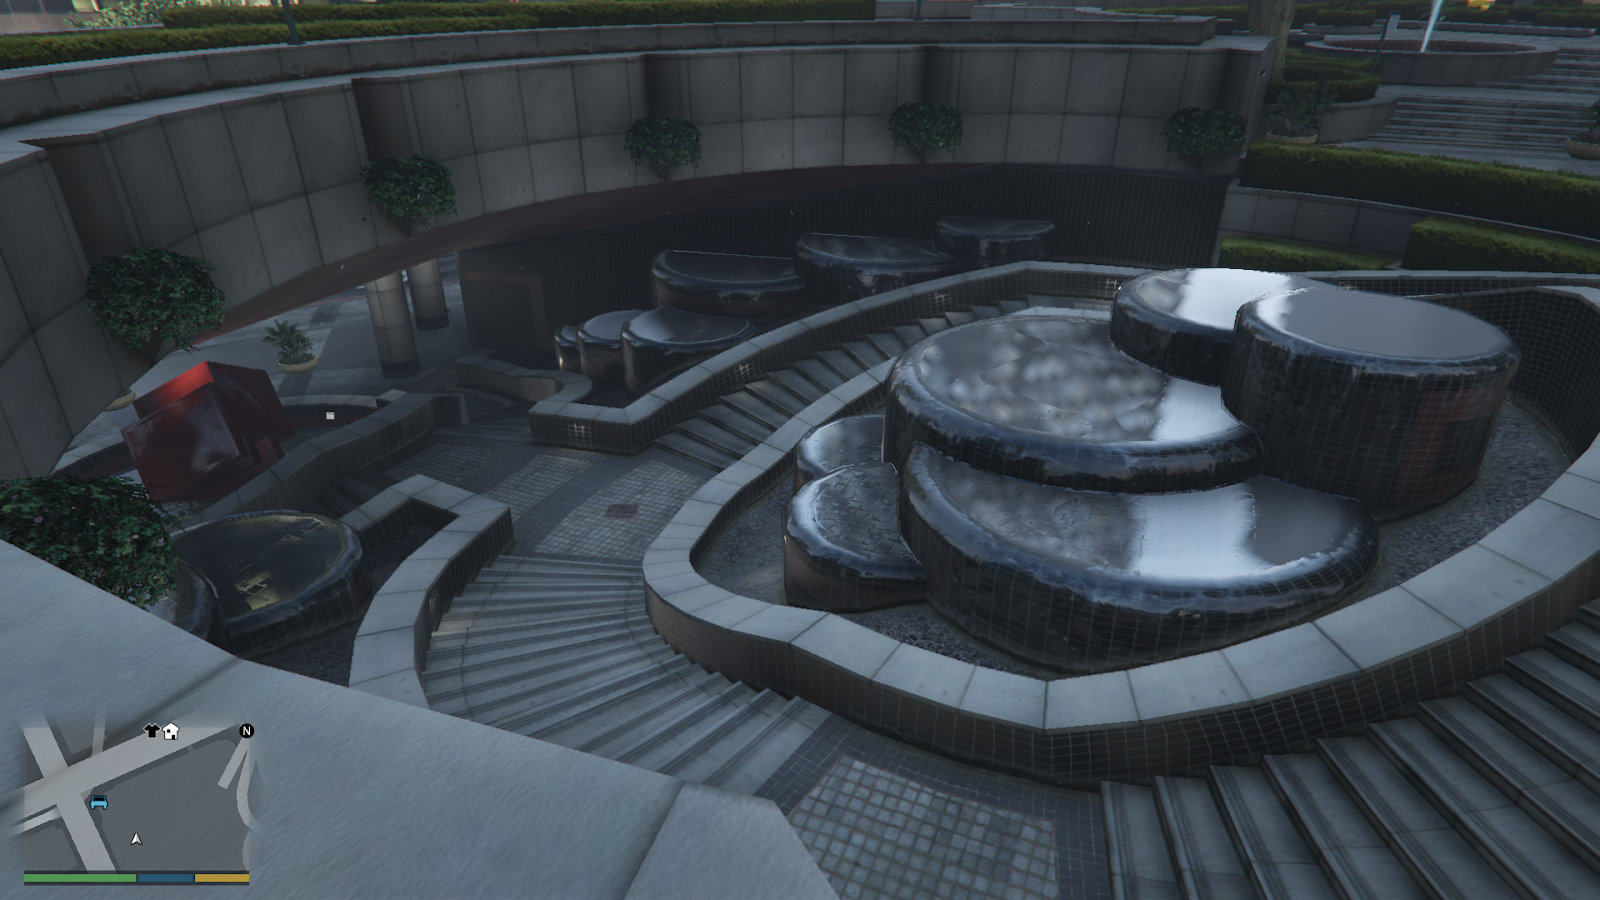 Where is Maze Bank in GTA 5? - Quora